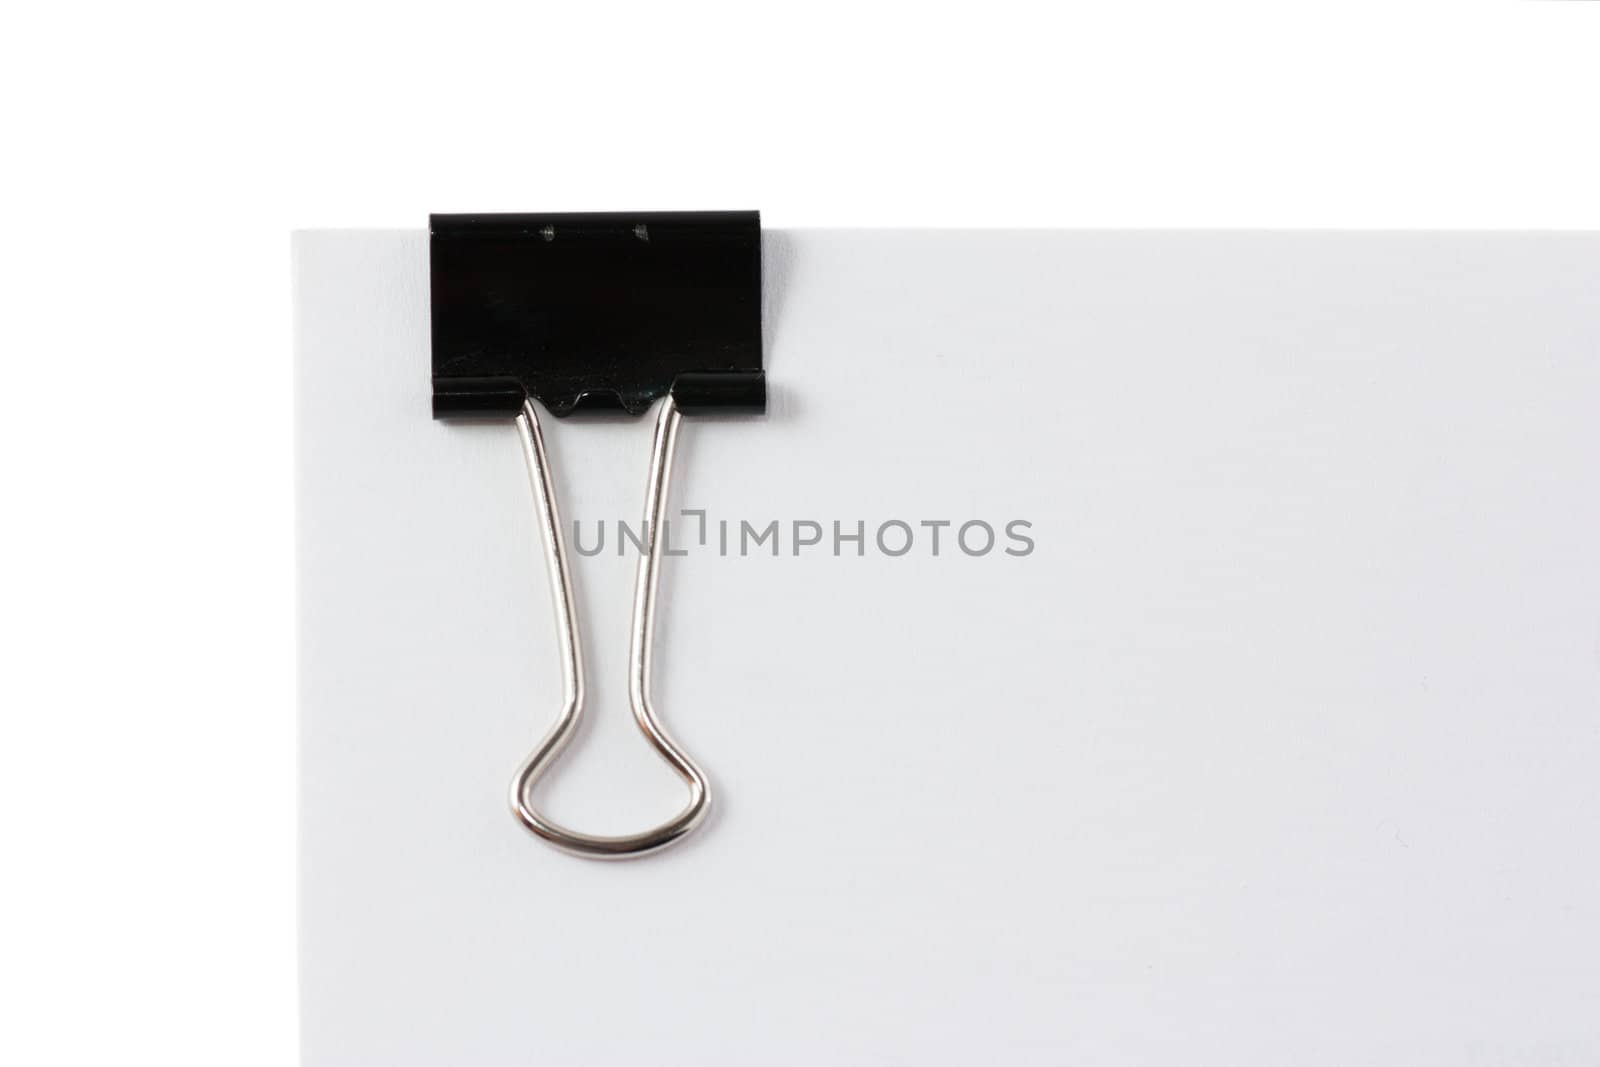 Paper clip by AGorohov